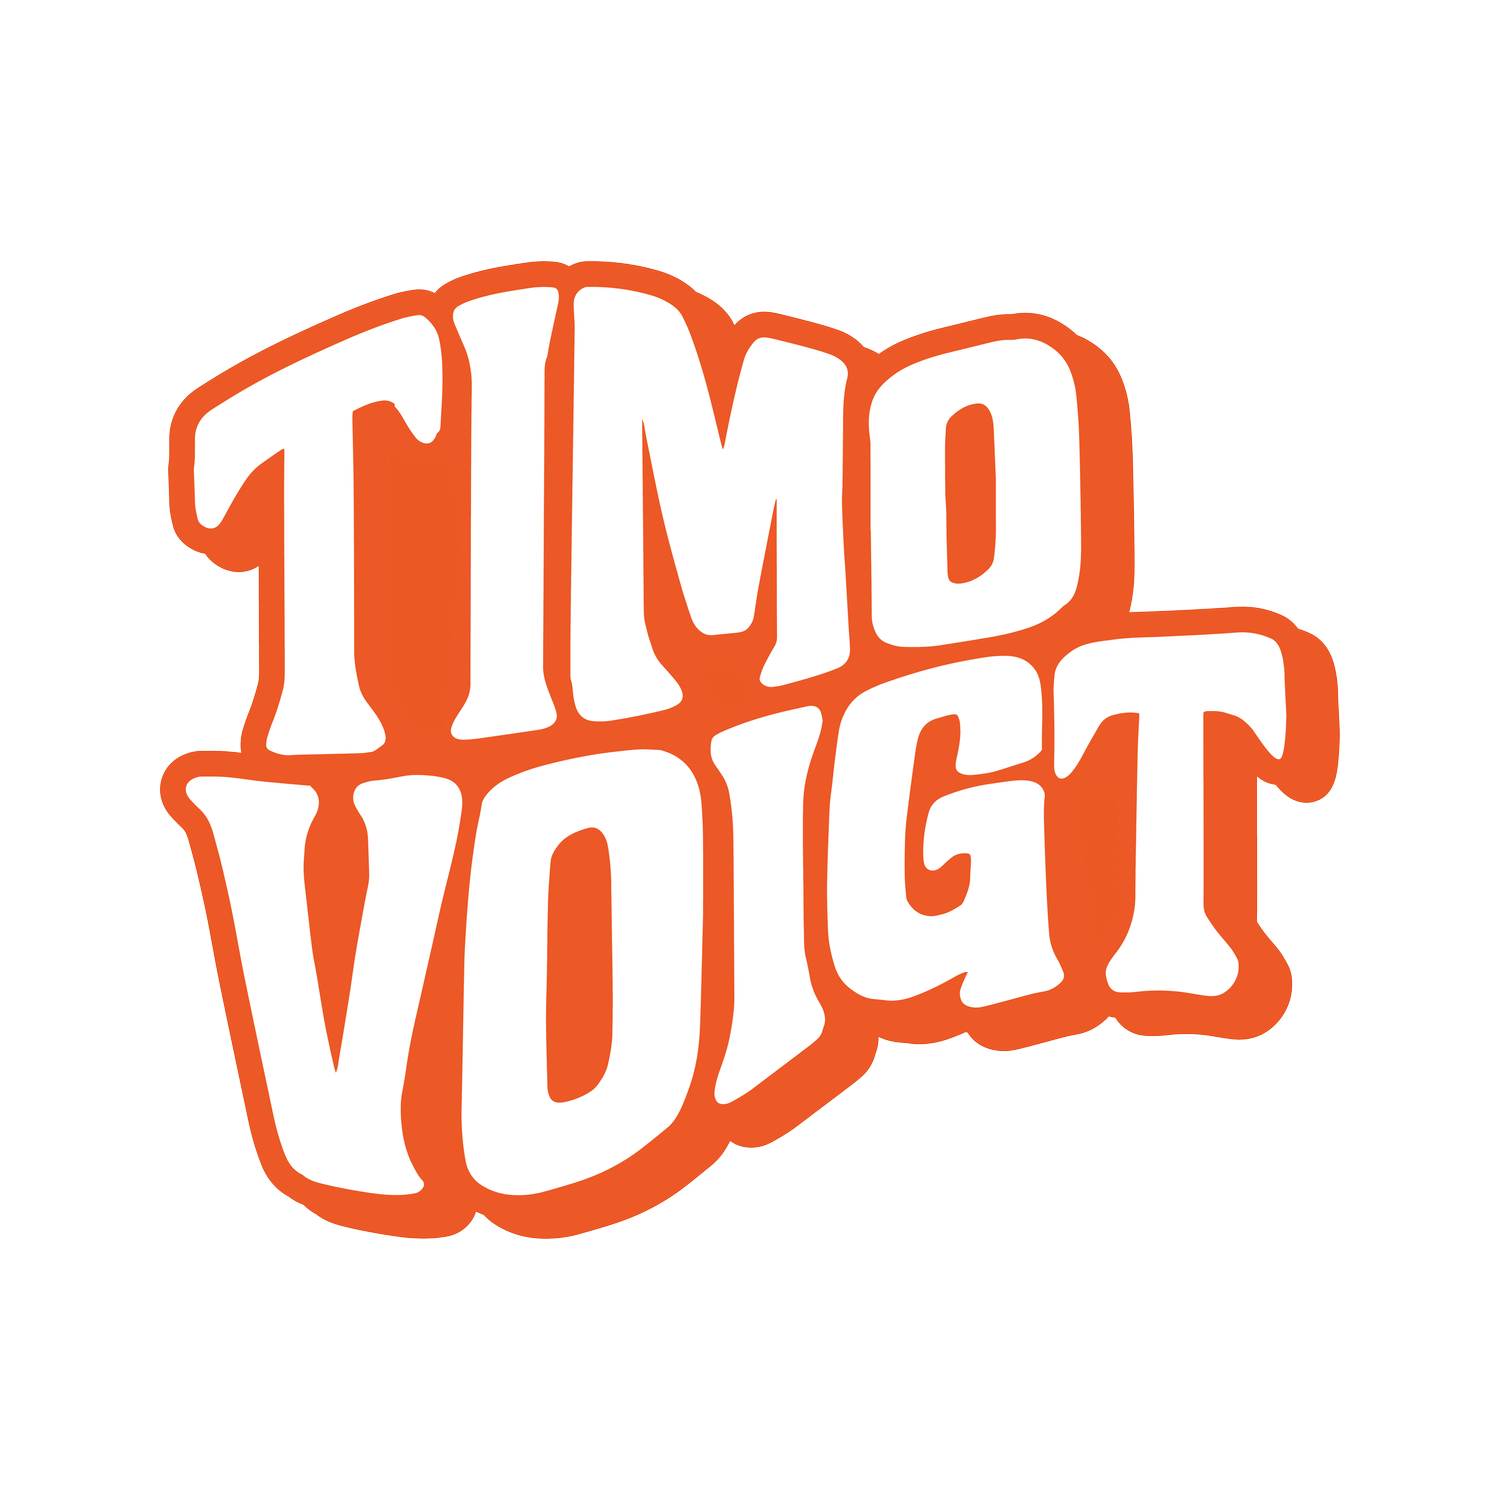 Timo Voigt